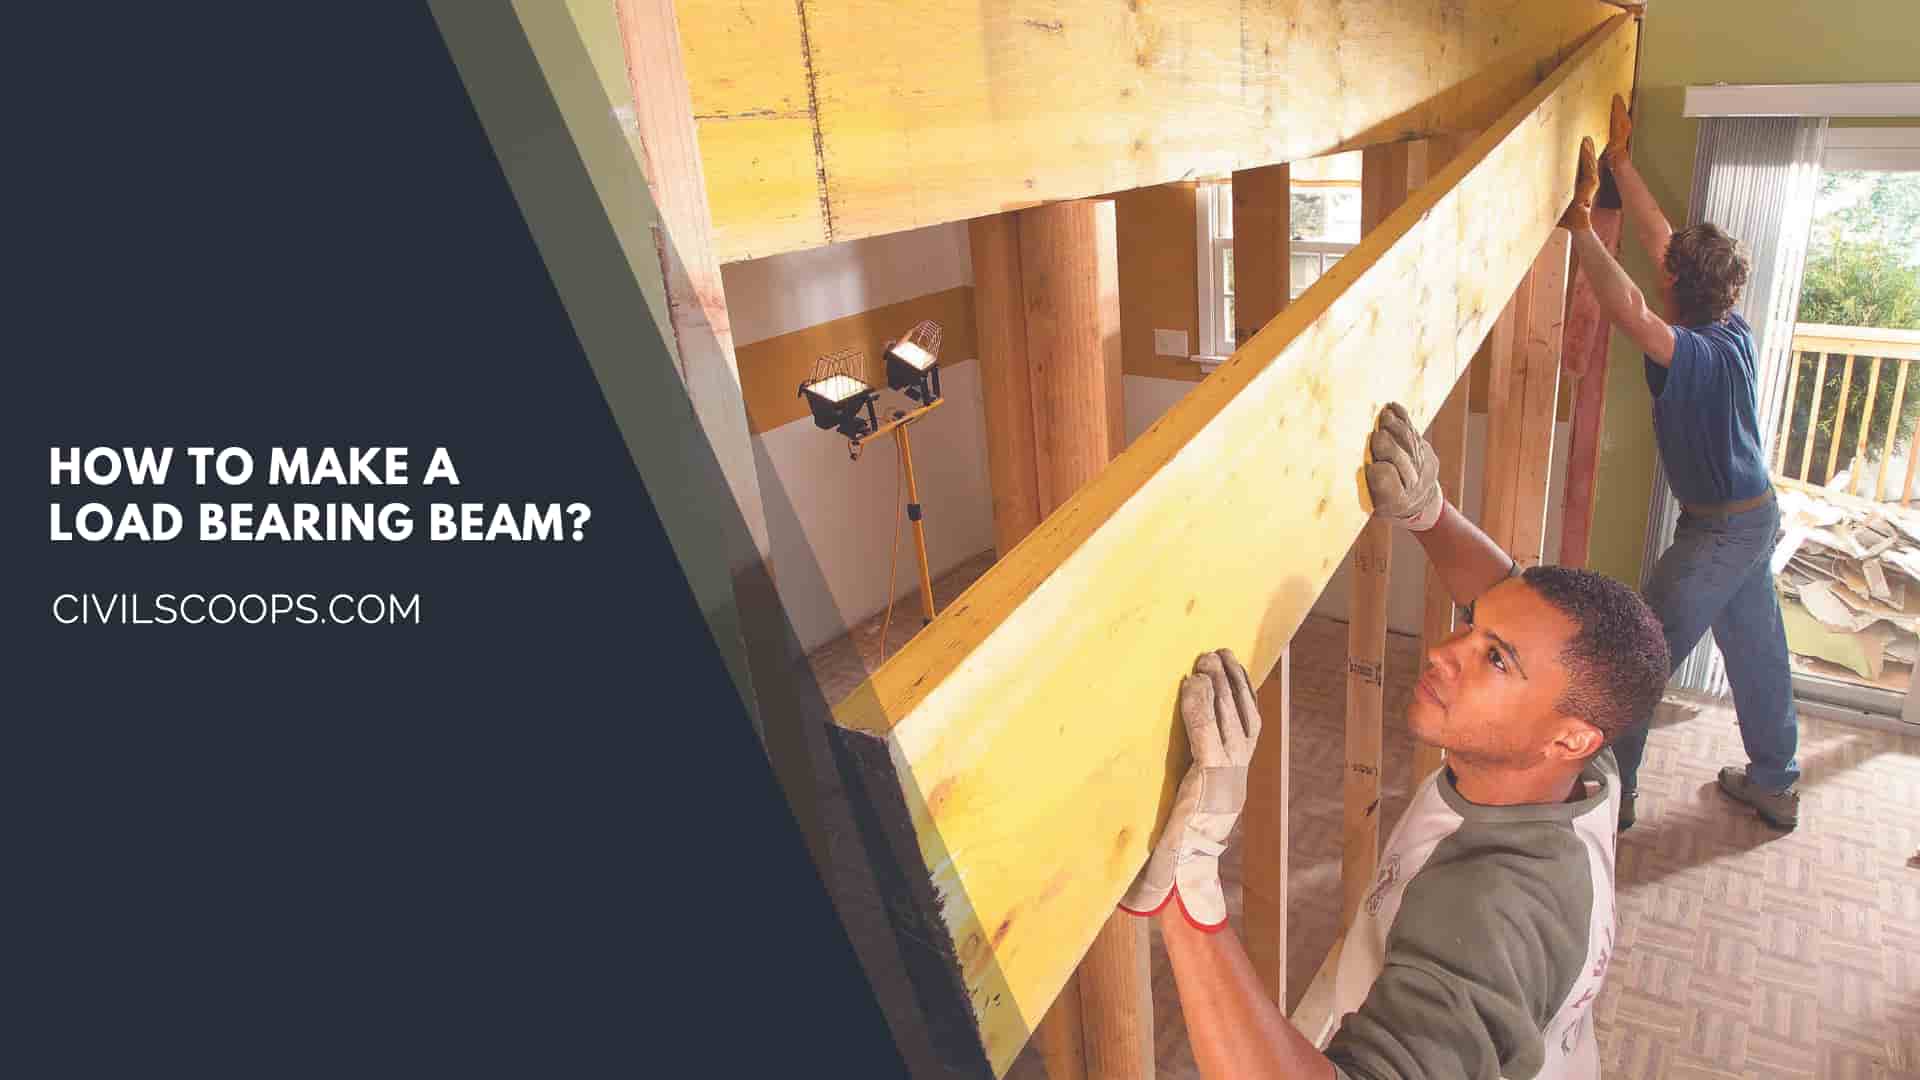 How to Make a Load Bearing Beam